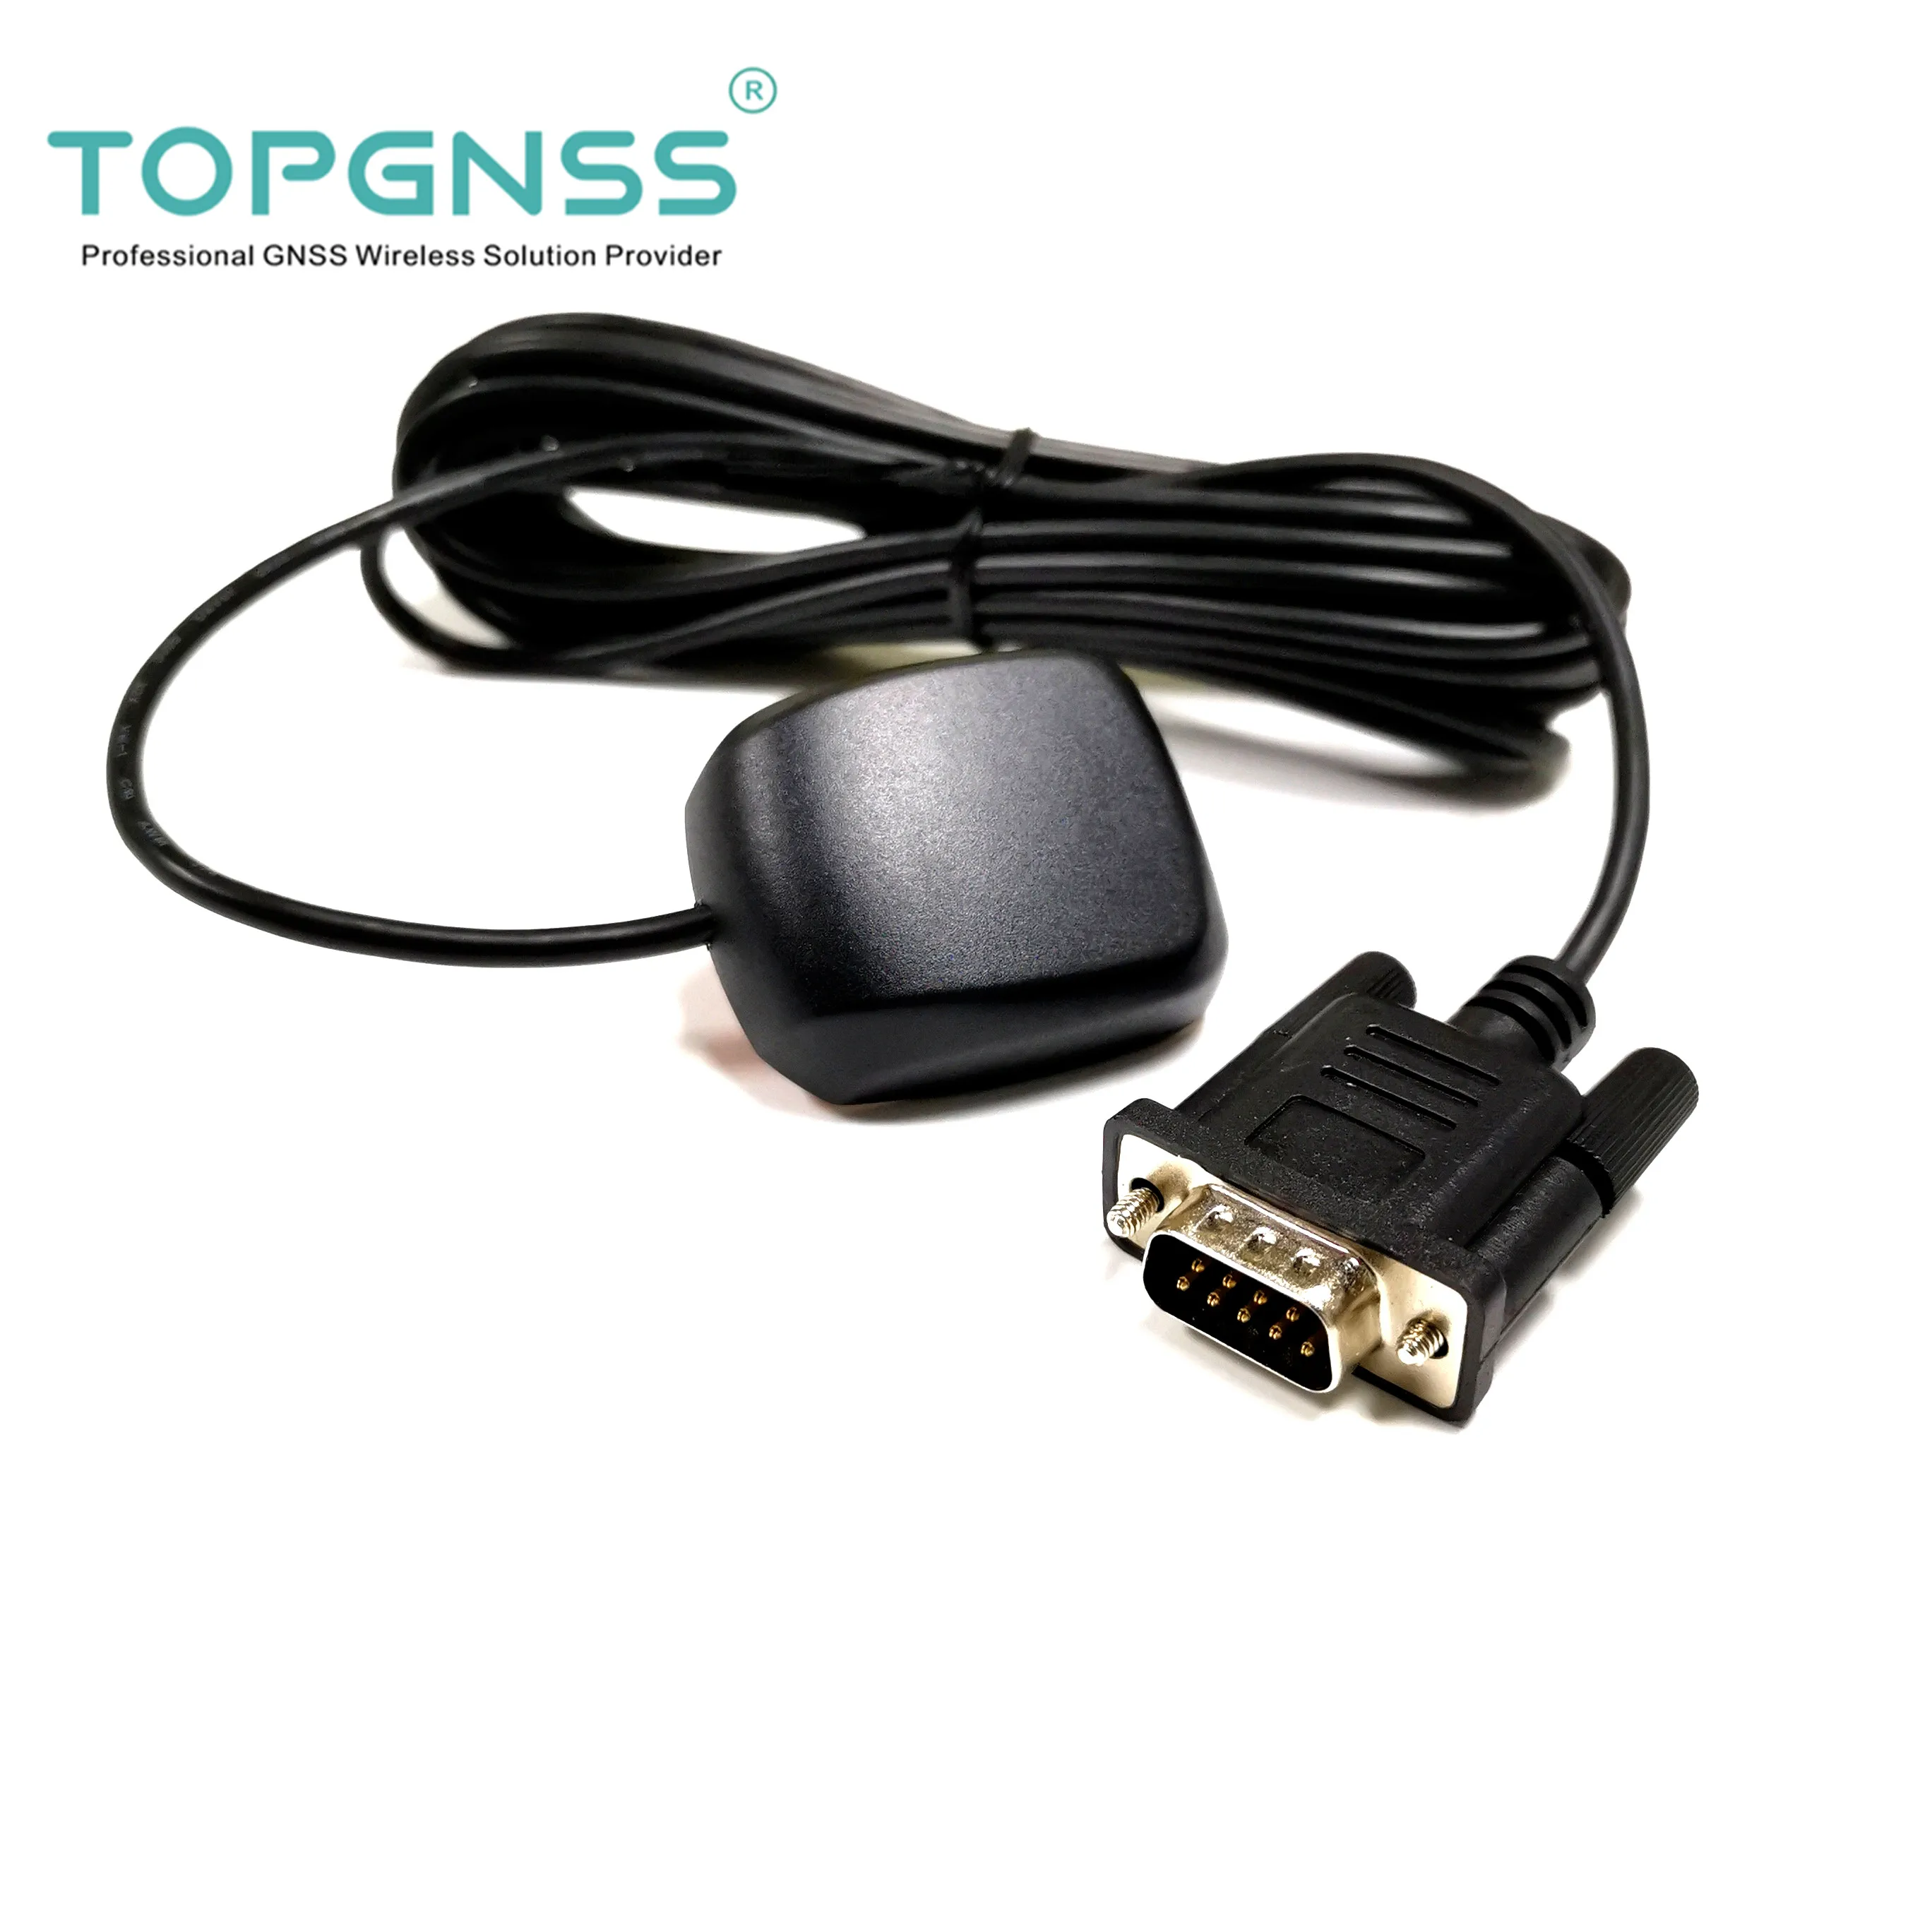 Topgnss Rs232 Gps Receiver Glonass Receive Galileo Dual Mode Industrial  Control Quality Db9 Male Gn200l Nmea 00183 - Buy Gps Receiver,Rs232 Gps,Gps  